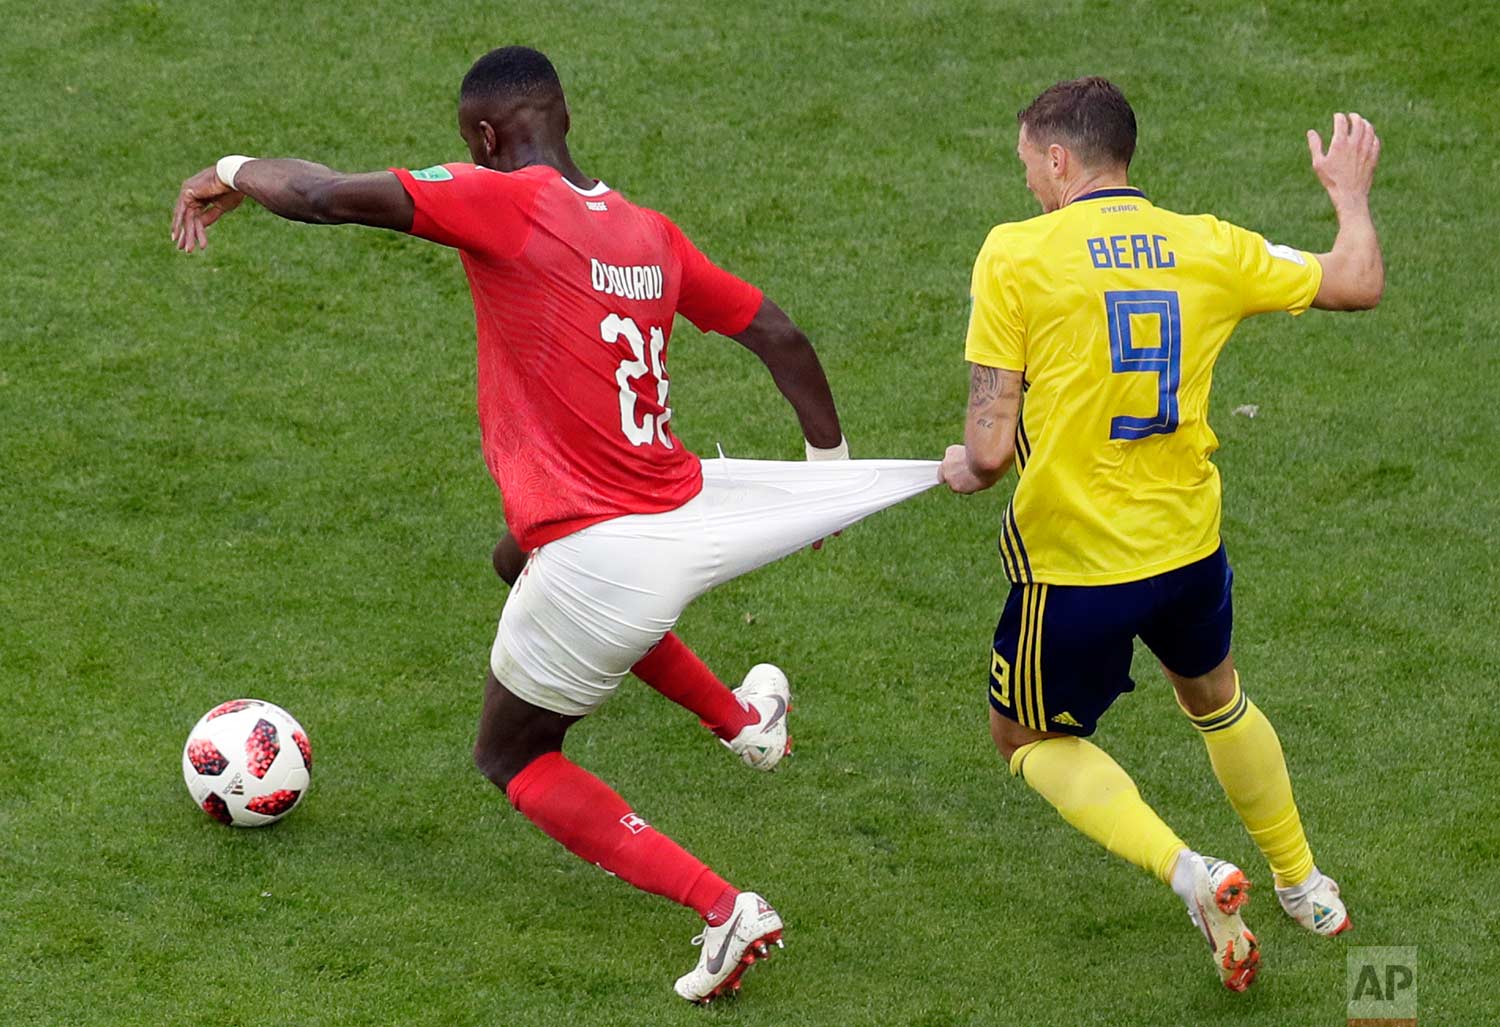  Switzerland's Johan Djourou, left, duels for the ball with Sweden's Marcus Berg during the round of 16 match between Switzerland and Sweden at the 2018 soccer World Cup in the St. Petersburg Stadium, in St. Petersburg, Russia, Tuesday, July 3, 2018.